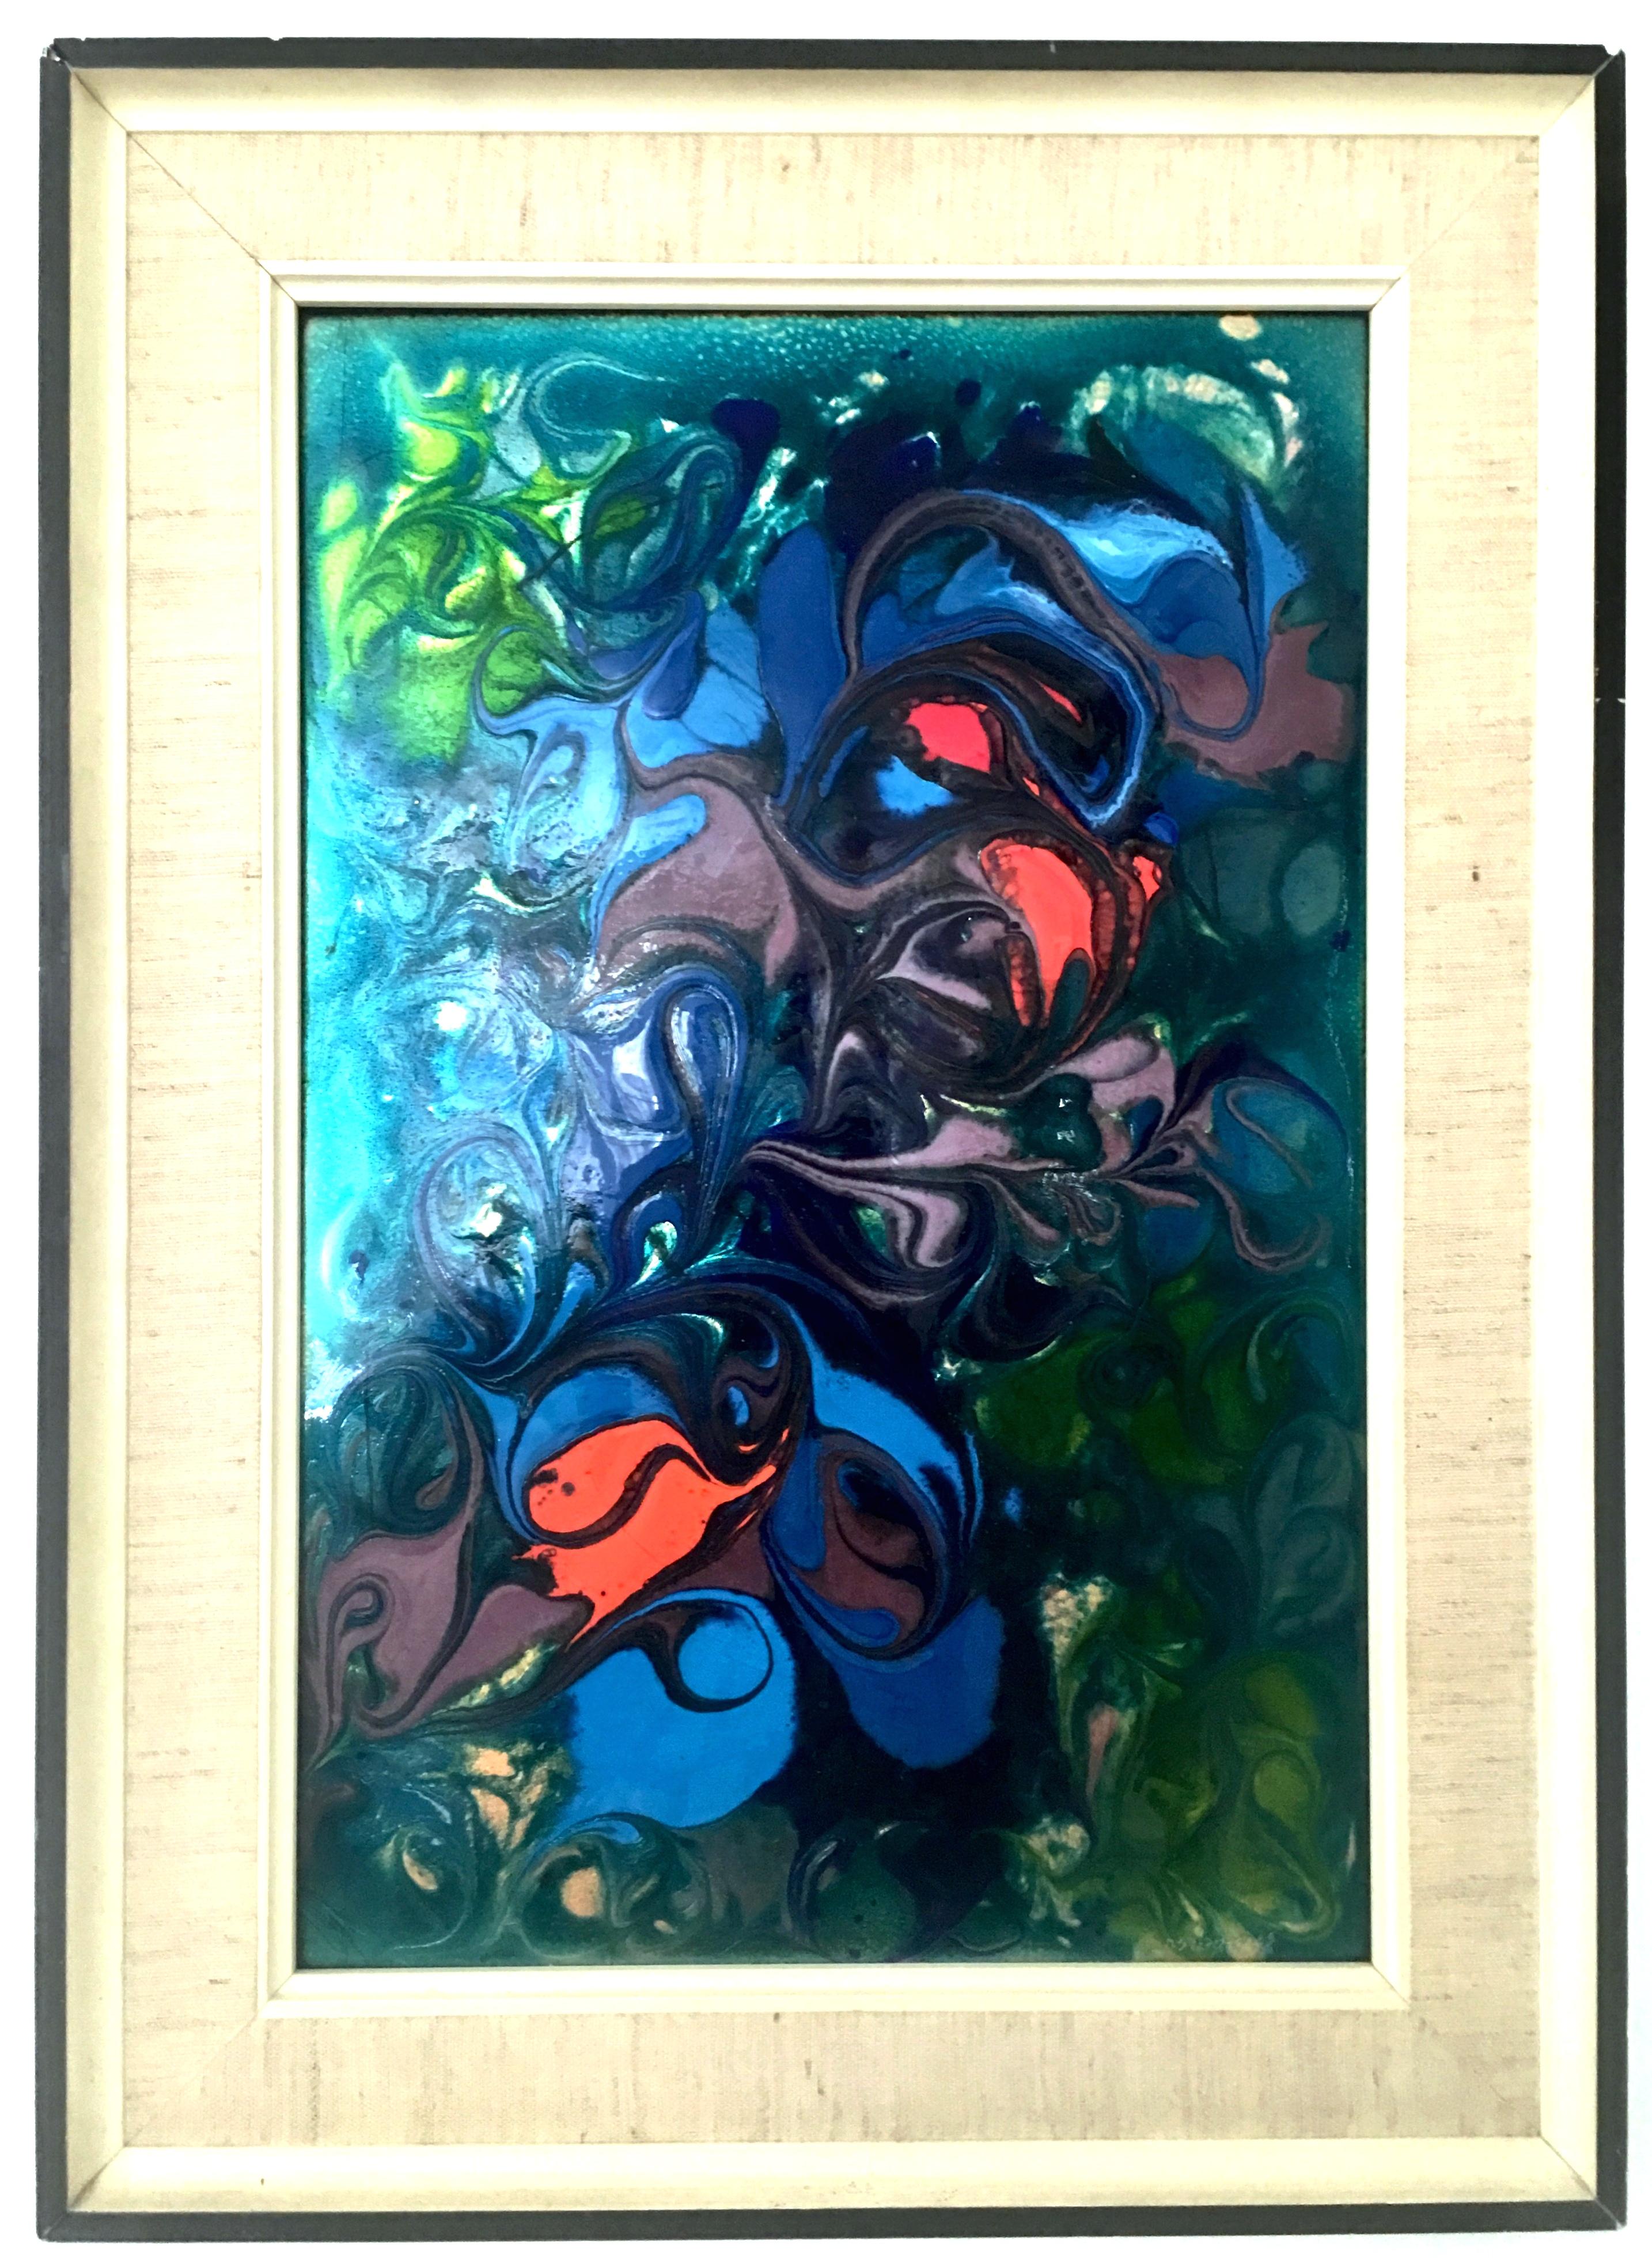 20th century European original enamel on copper modern abstract painting, signed- numbered by artist, lower right, 034.20.8238. This one of a kind abstract painting features, vibrant and both muted, neon and metallic color effects in greens, blues,